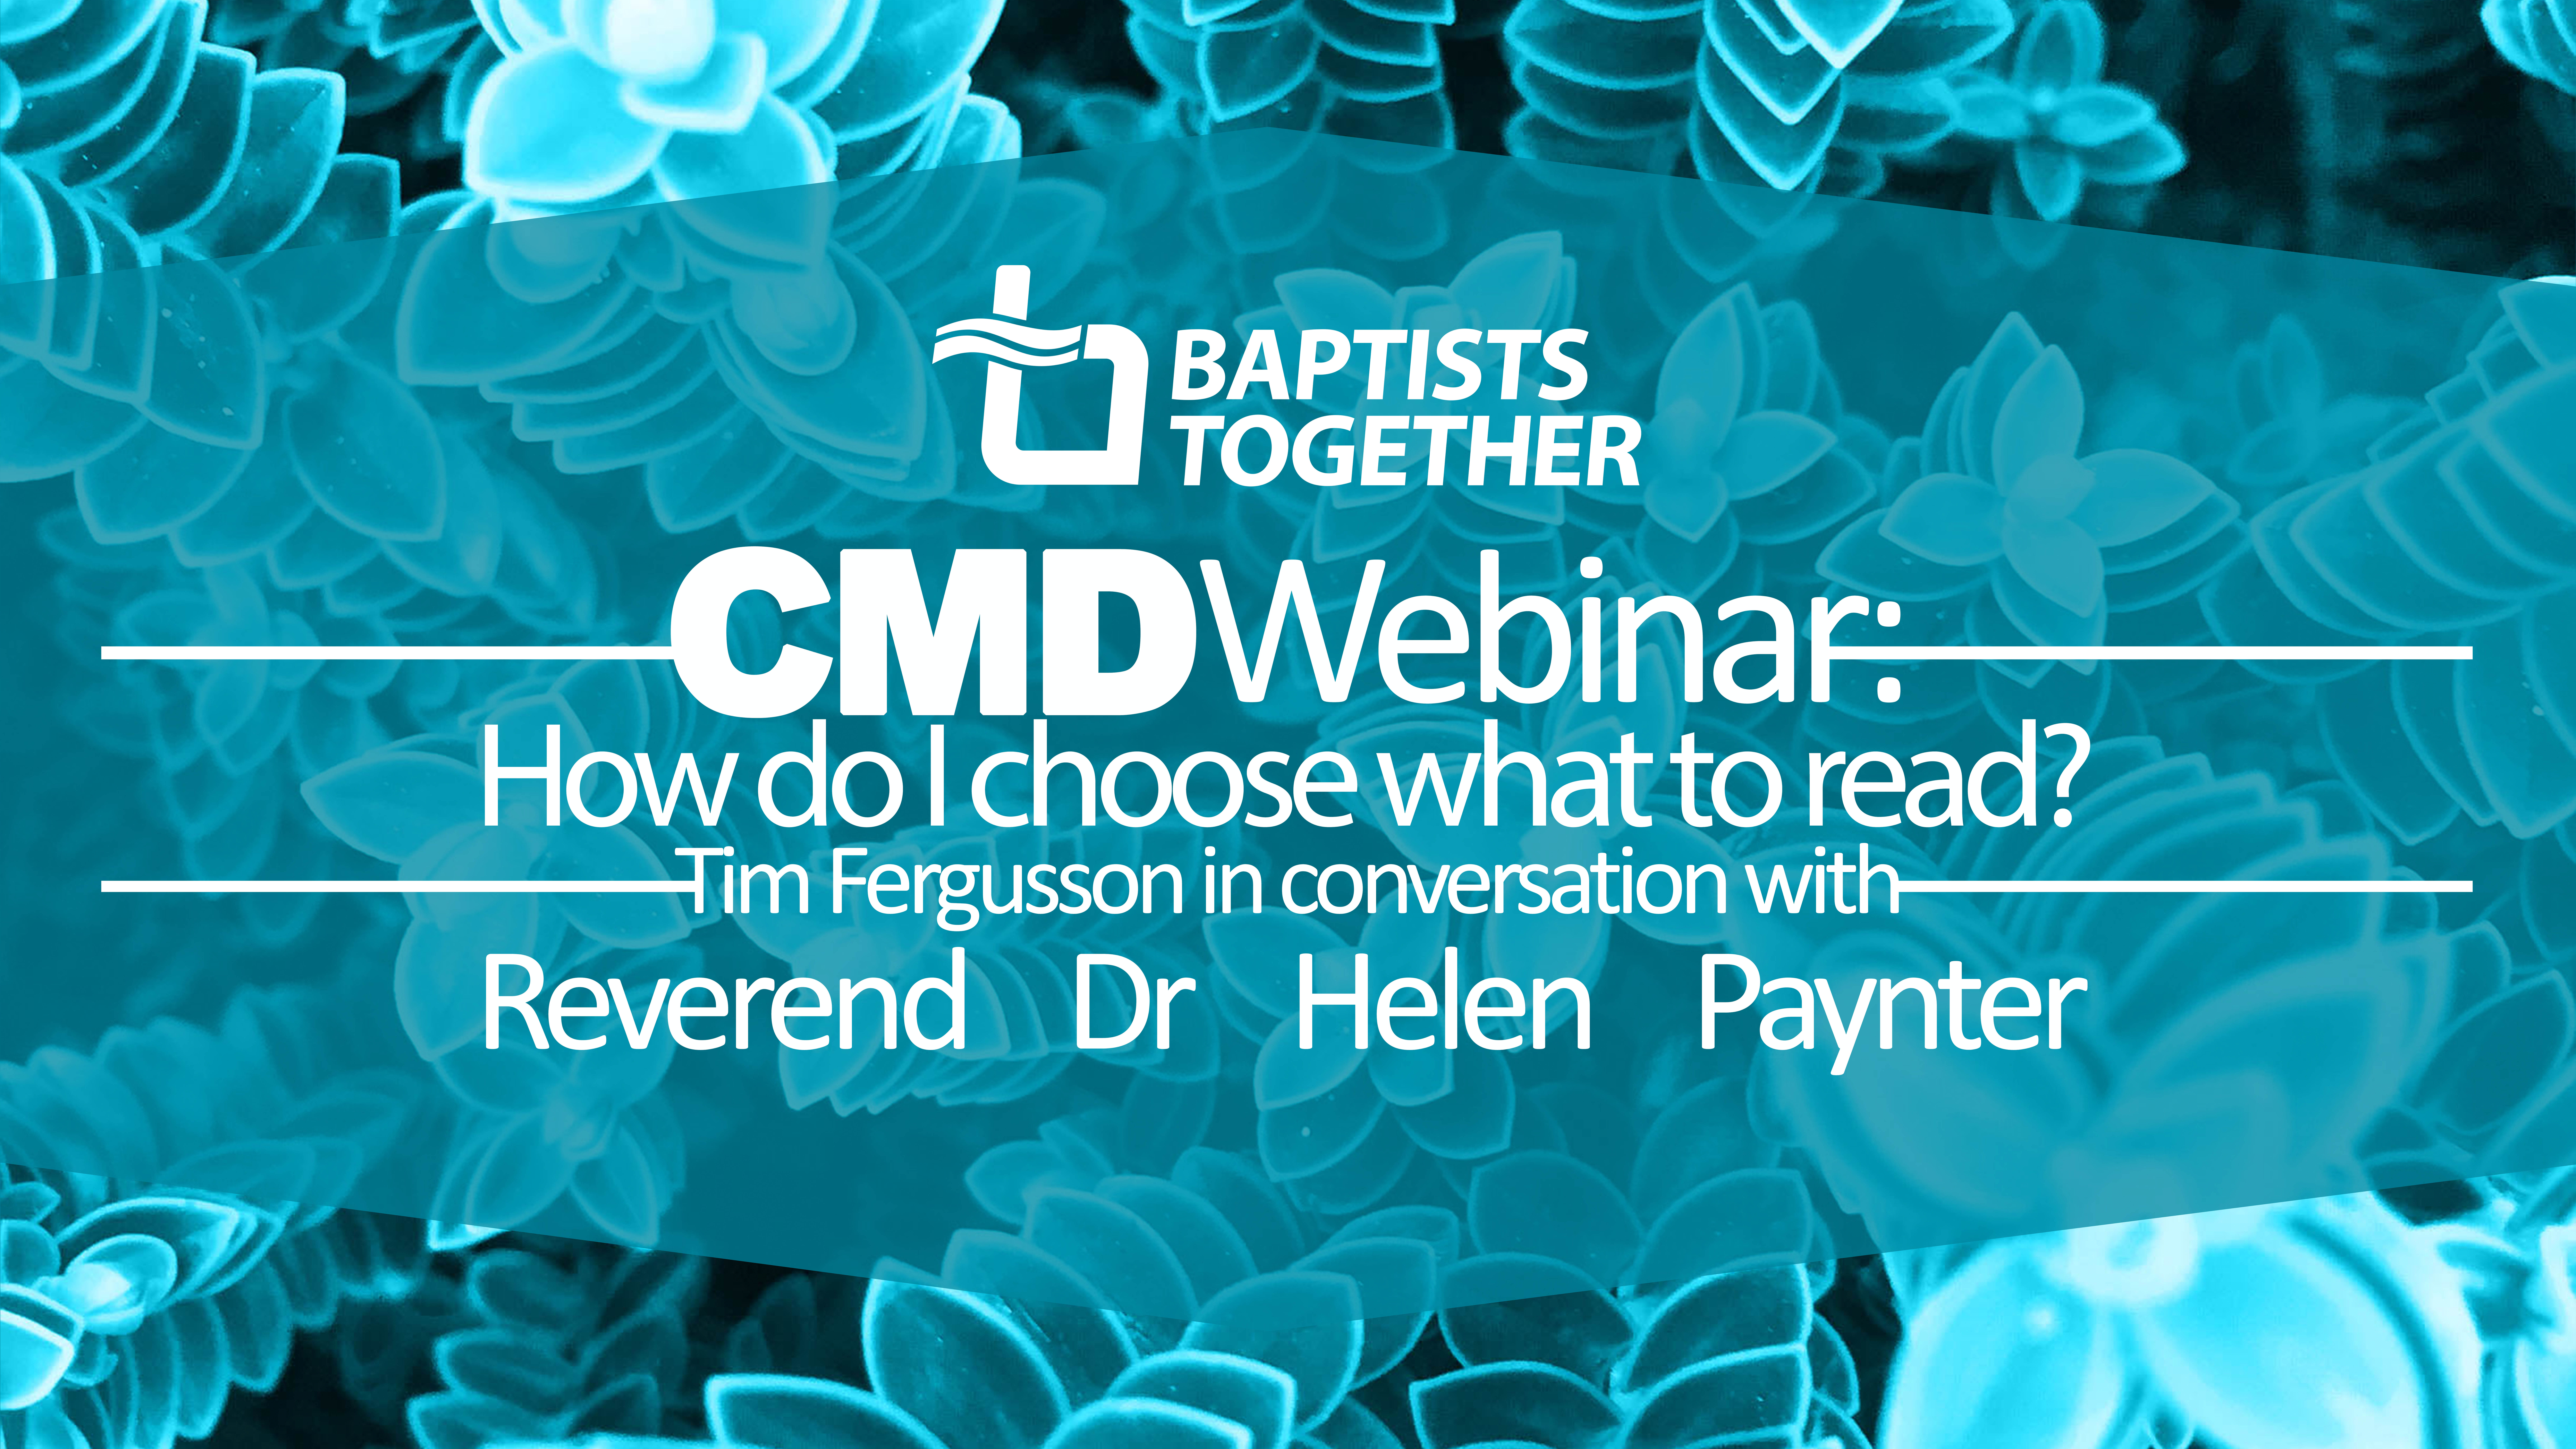 CMD webinar - How do I choose what to read?